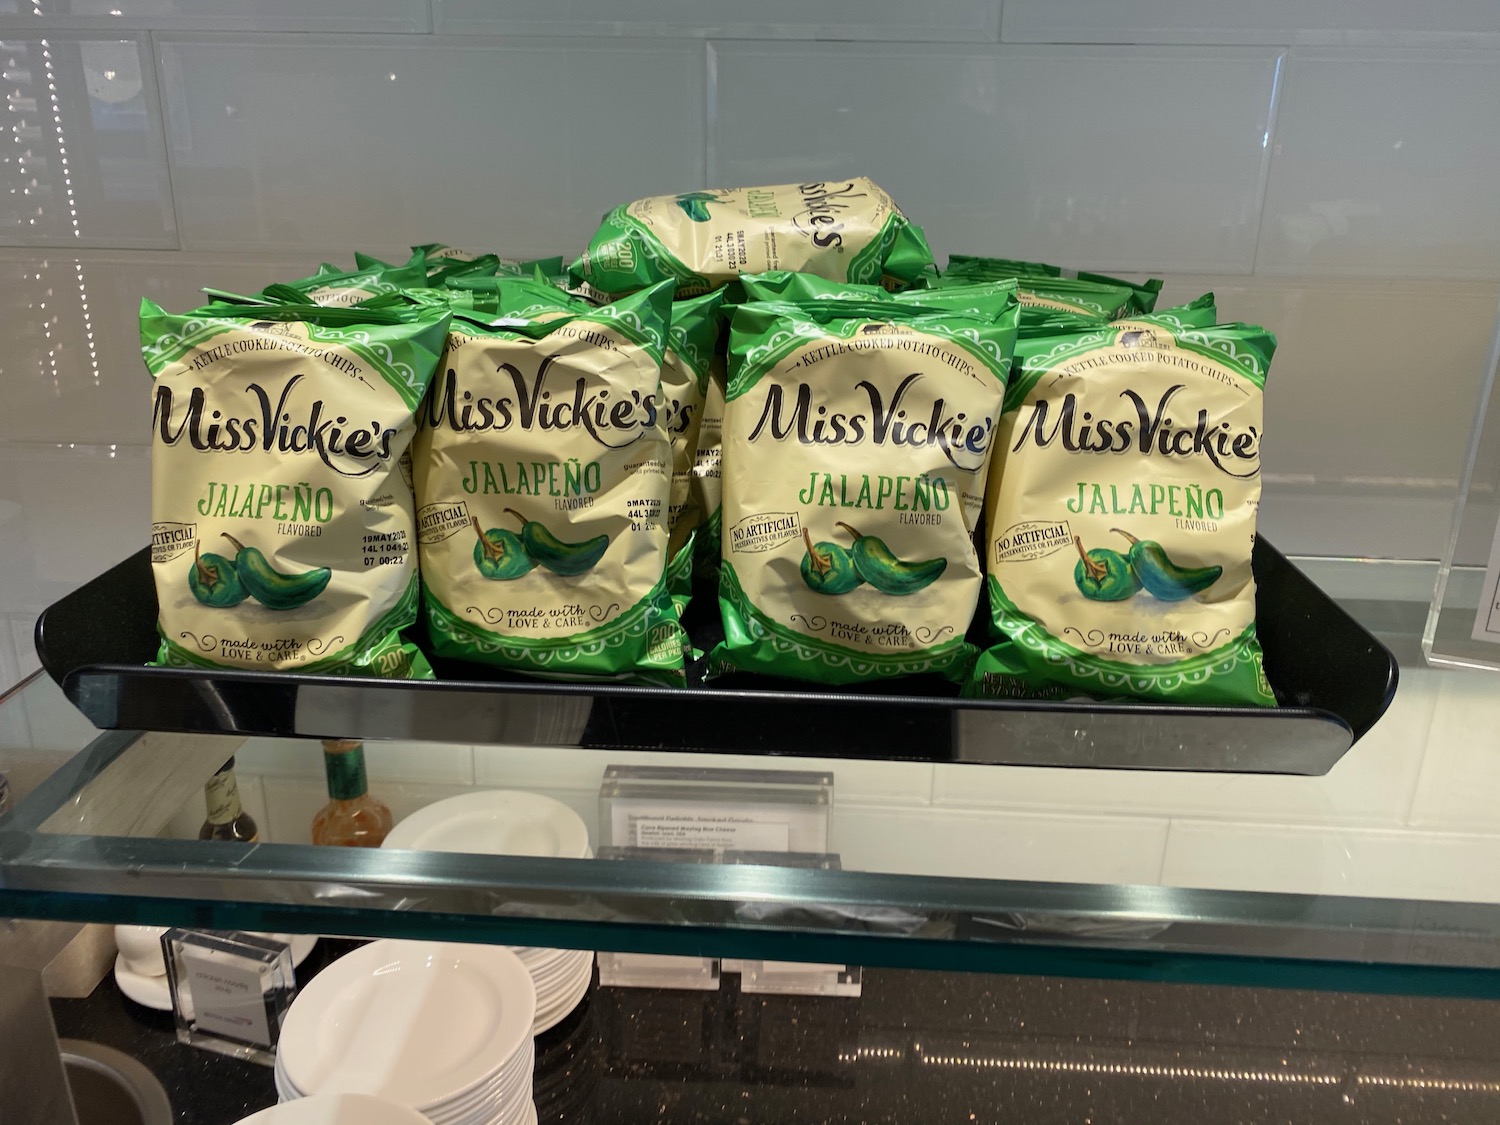 a group of bags of jalapeno on a shelf